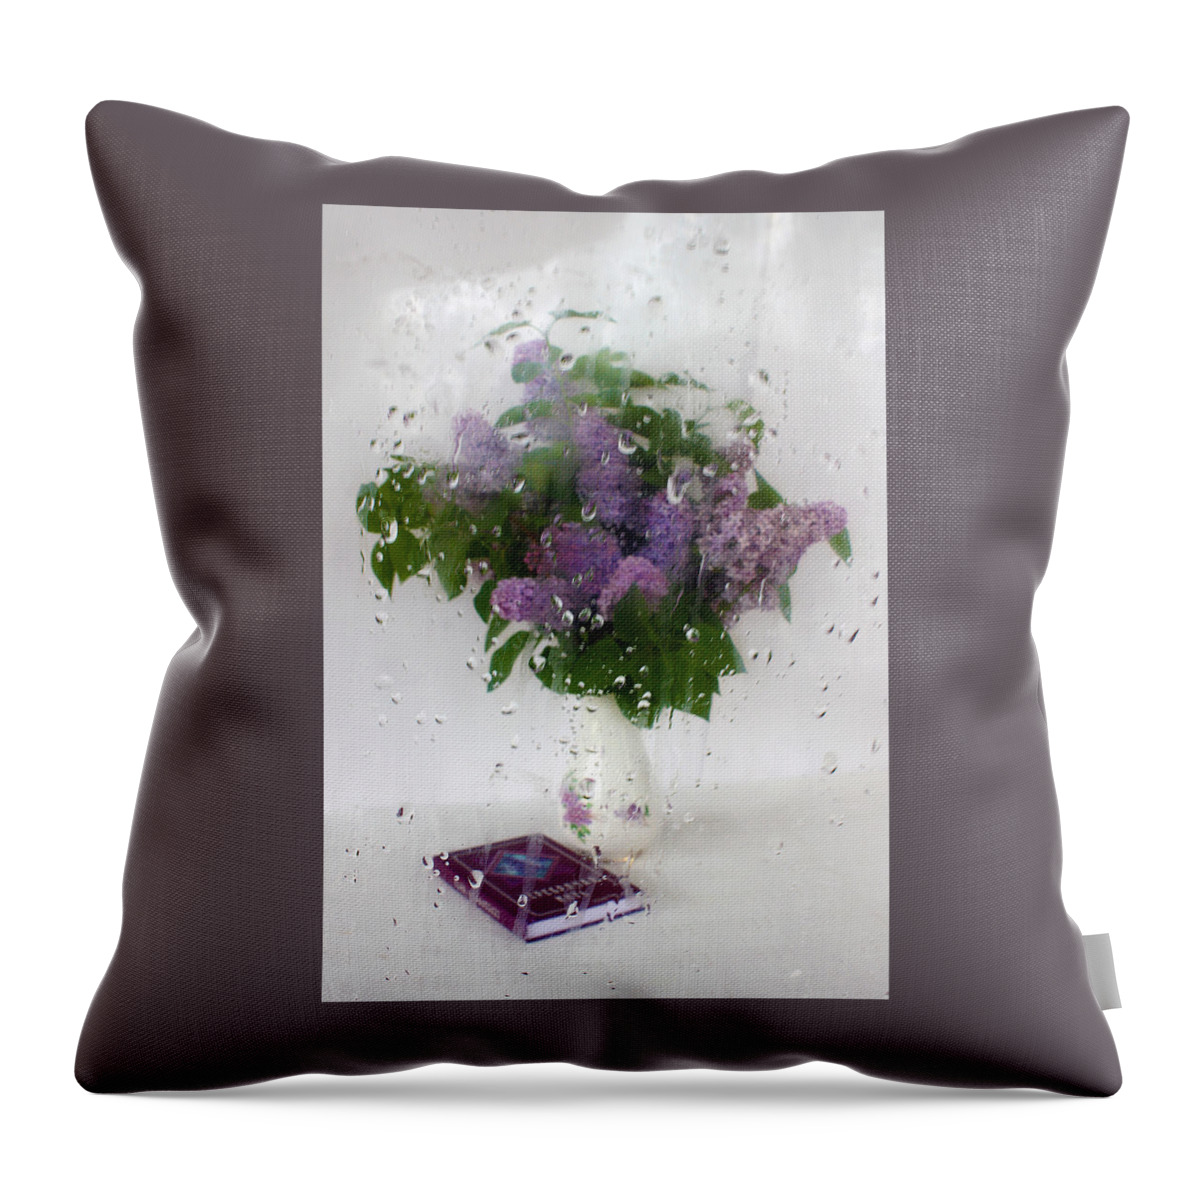 Lilac Throw Pillow featuring the photograph Lilac Poems. Behind the Rainy Window by Victor Kovchin